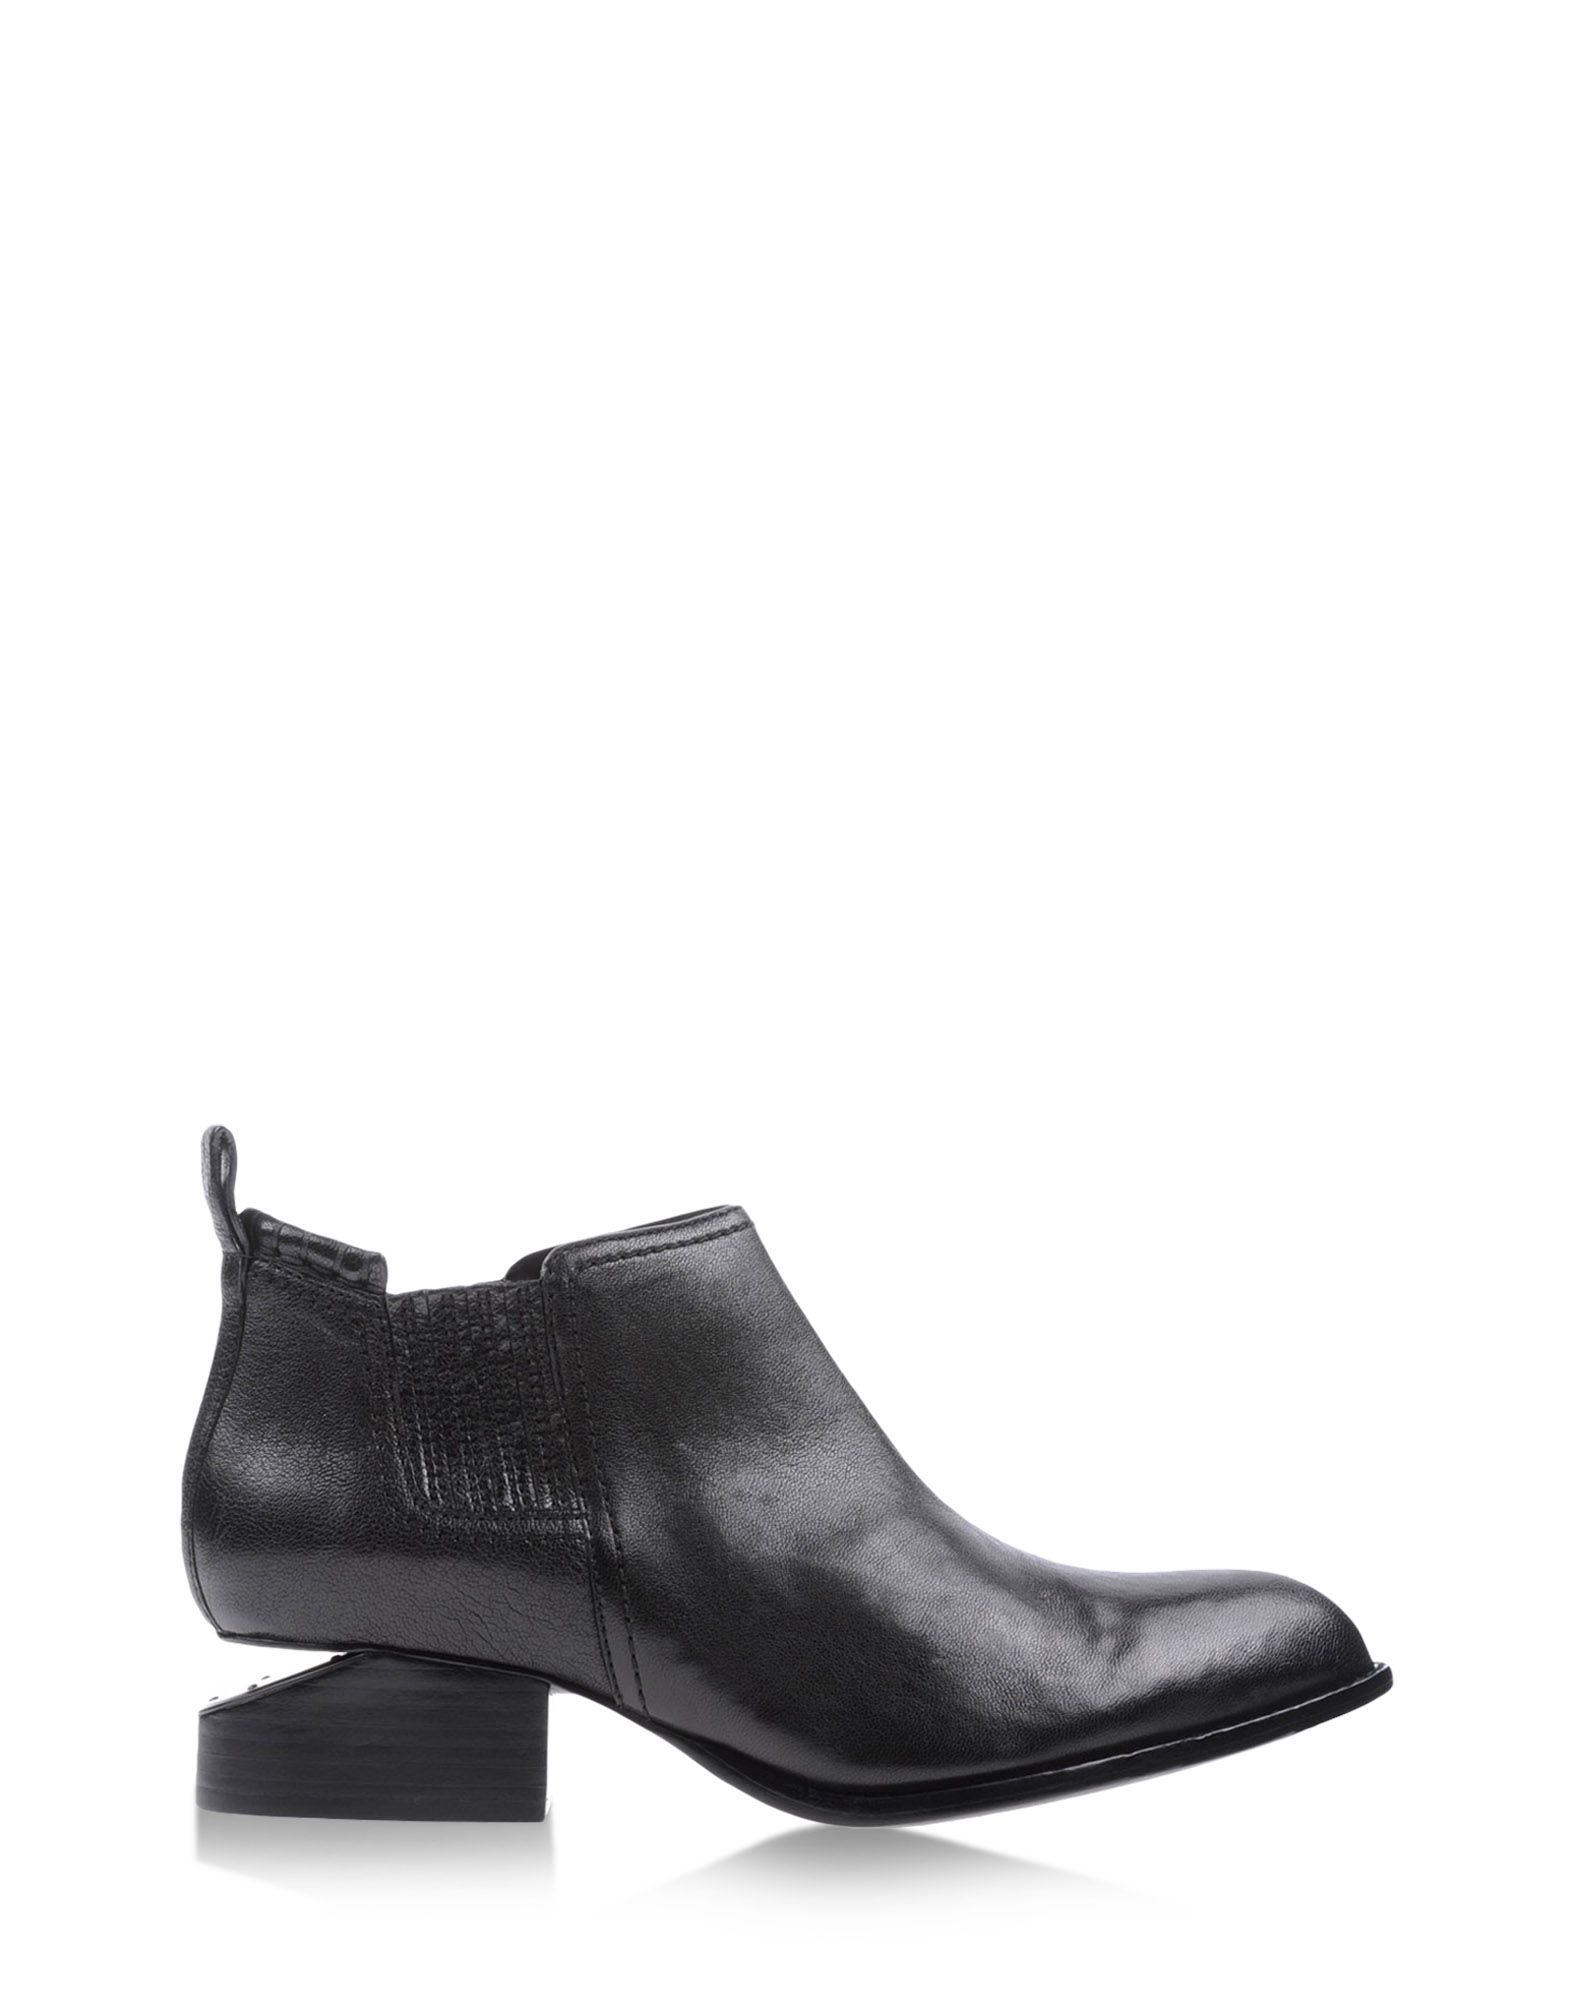 Alexander wang Ankle Boots in Black | Lyst